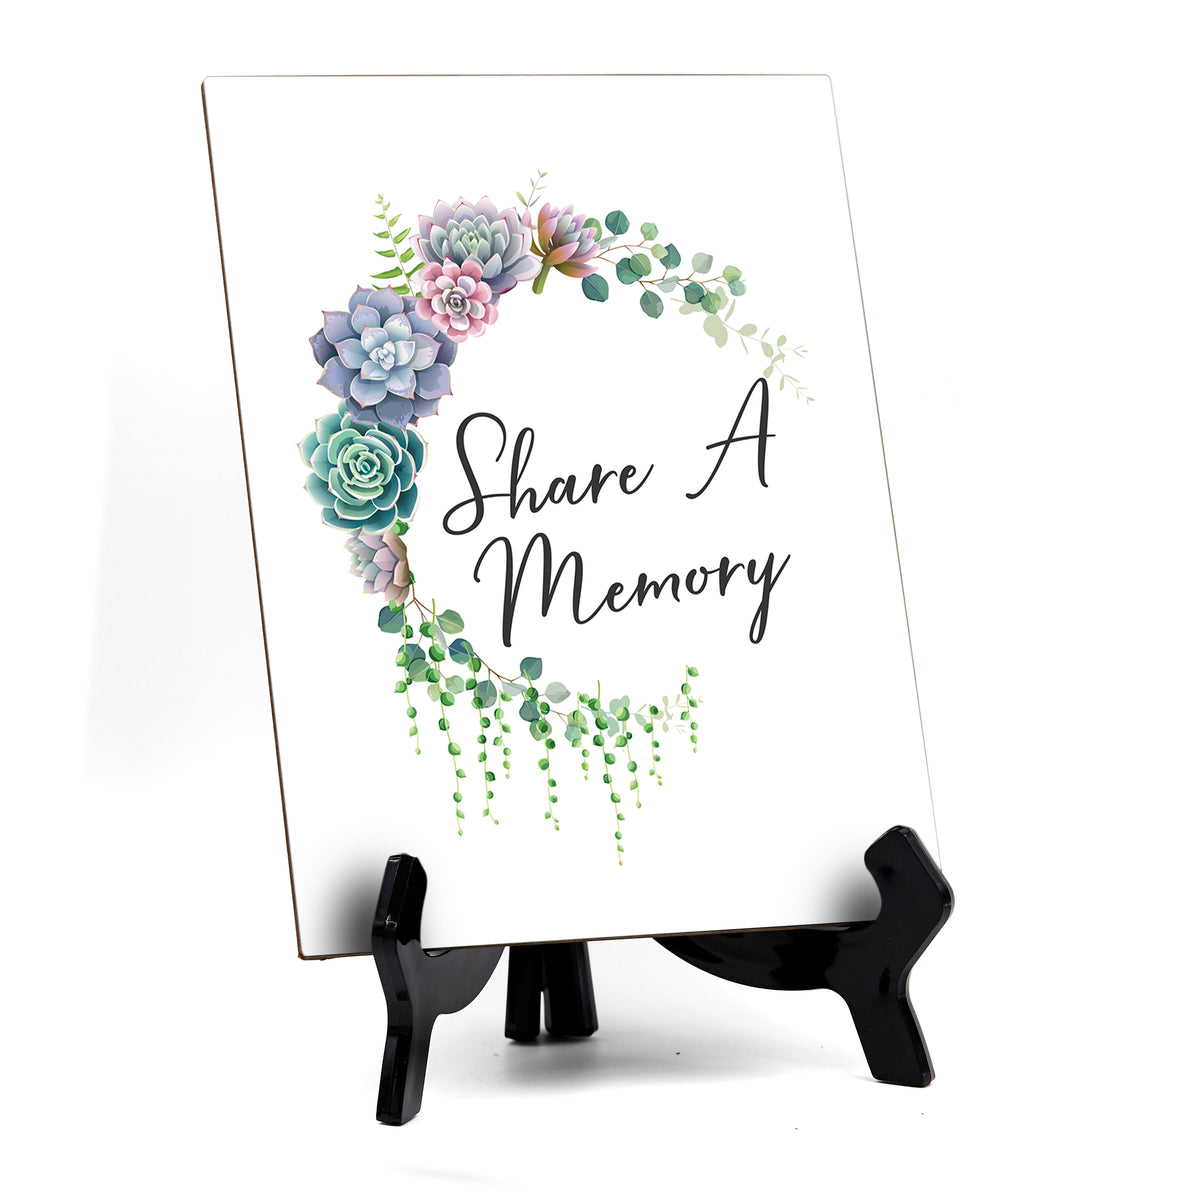 Share A Memory Table Sign with Easel, Floral Crescent Design (6" x 8")